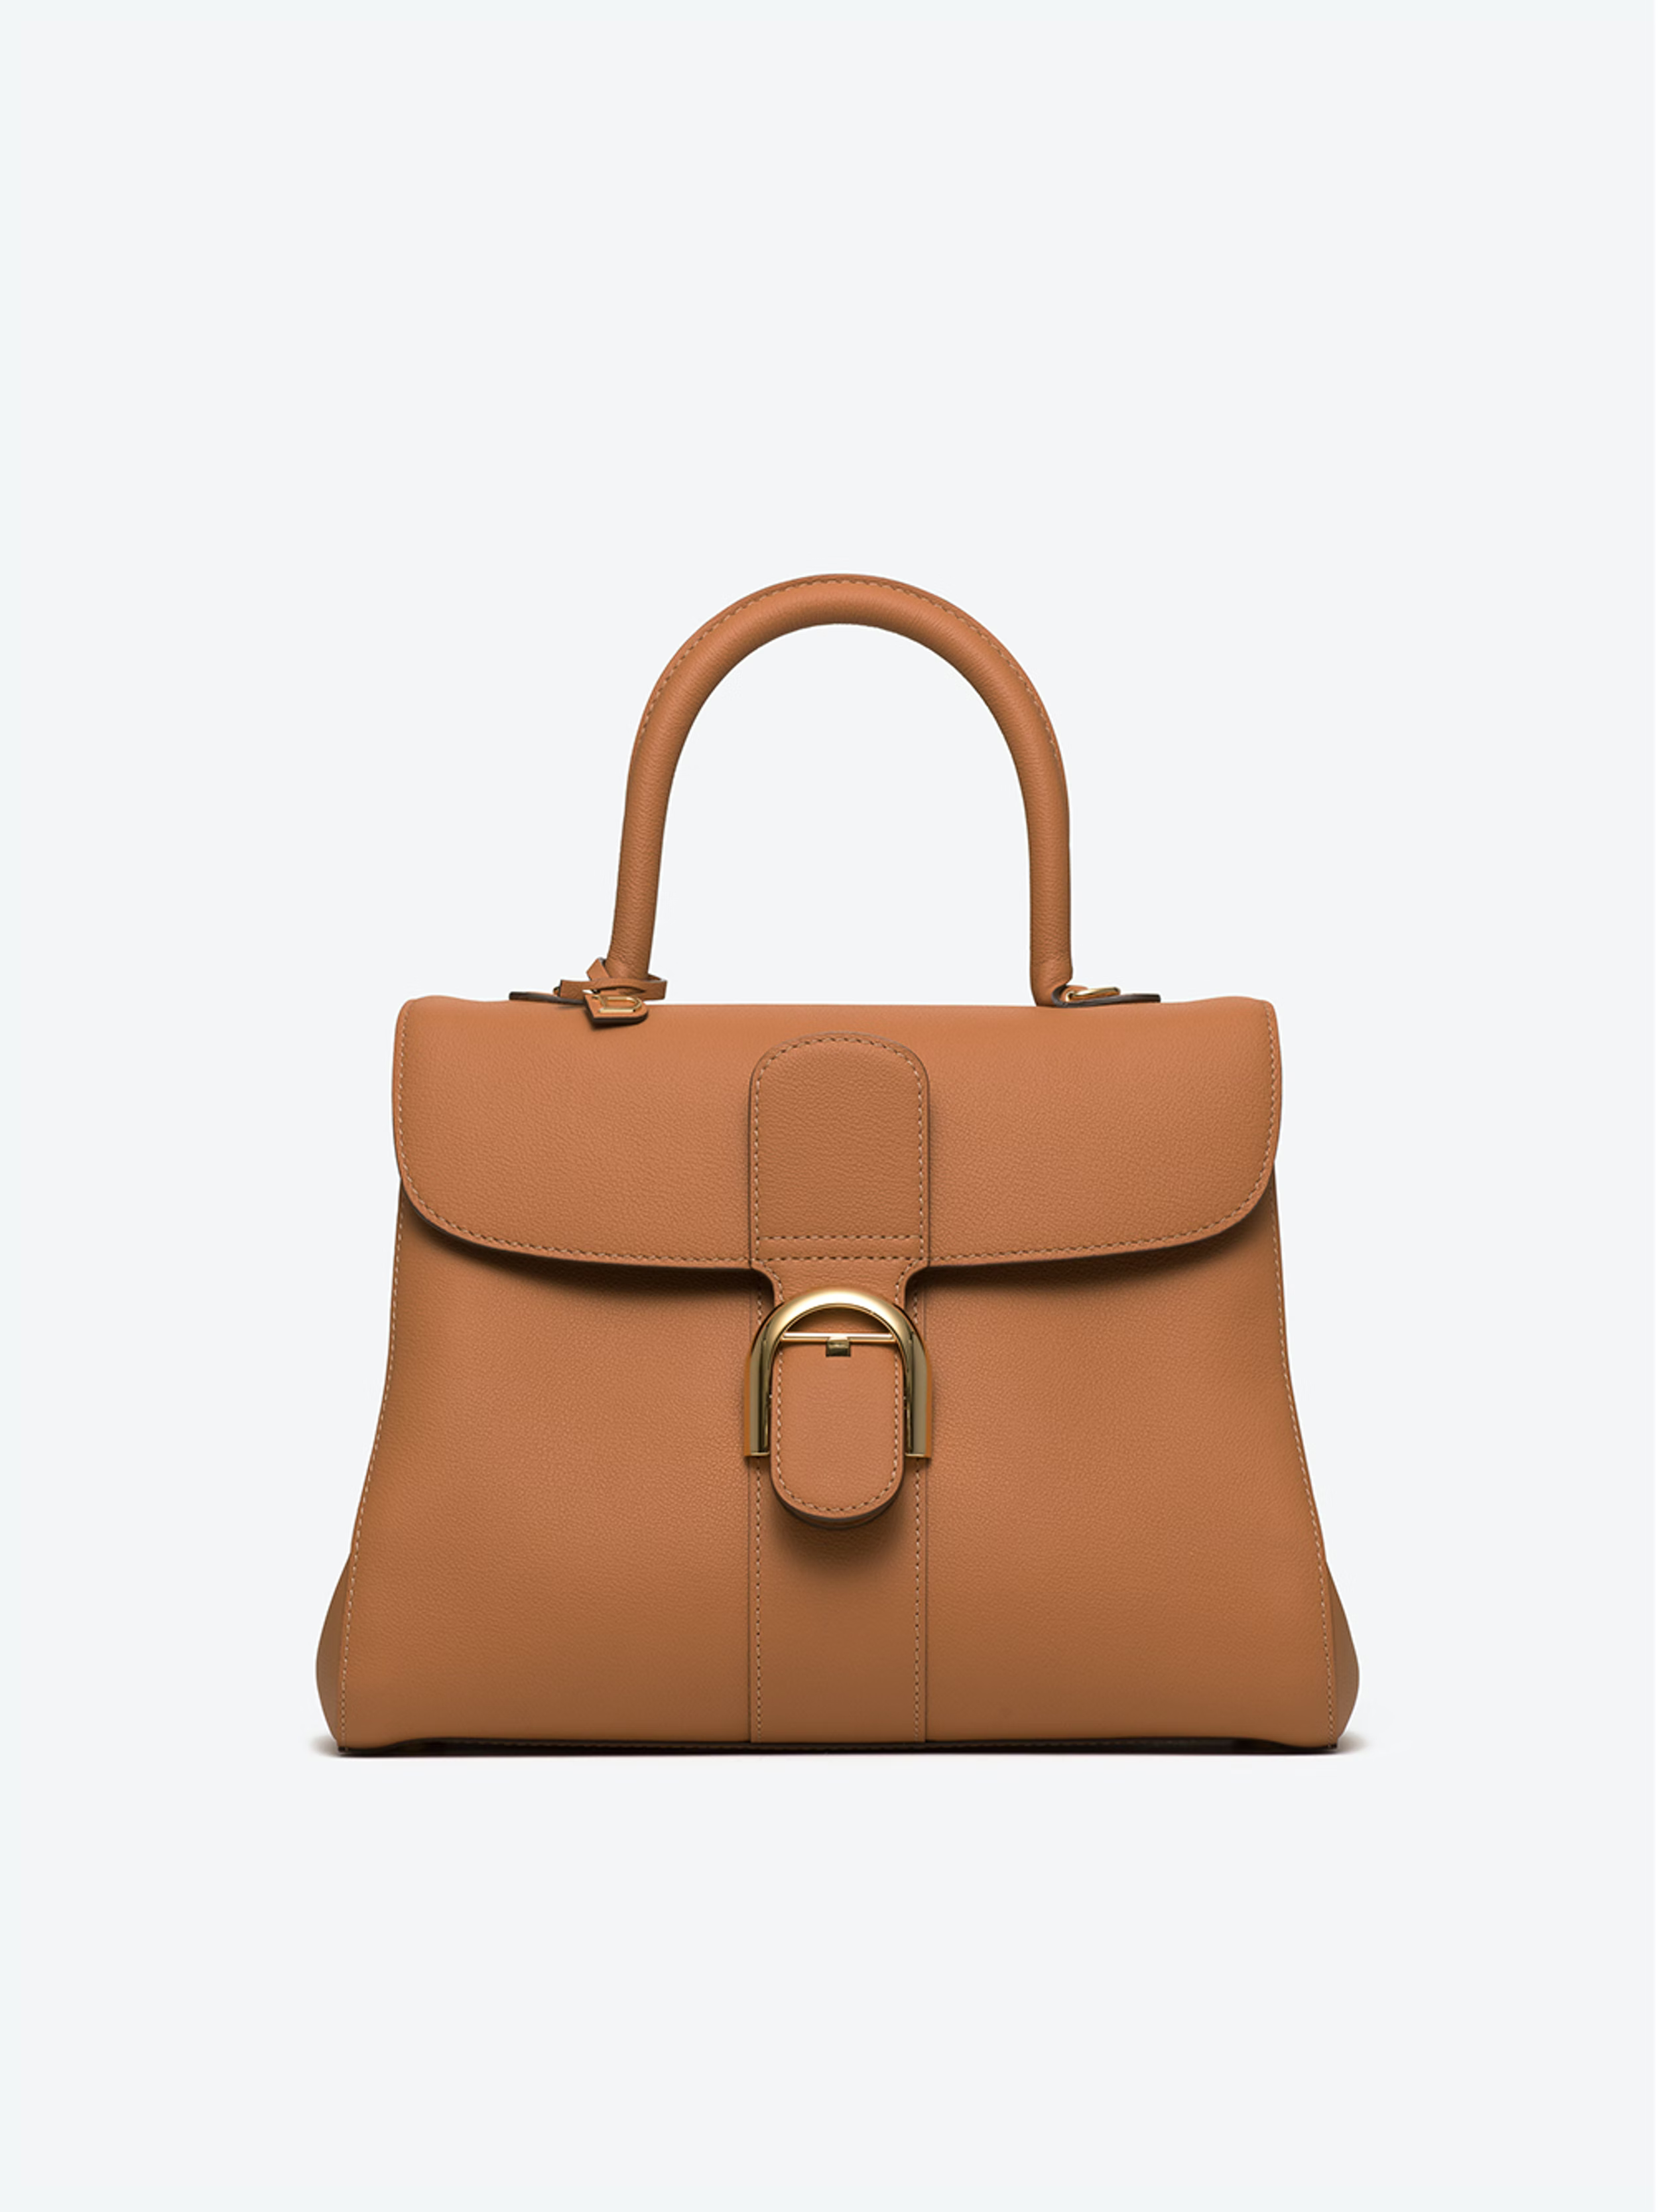 Delvaux's WondeRings Collection Is An Easy Way To Give Its Classic Bags An  Instant Update